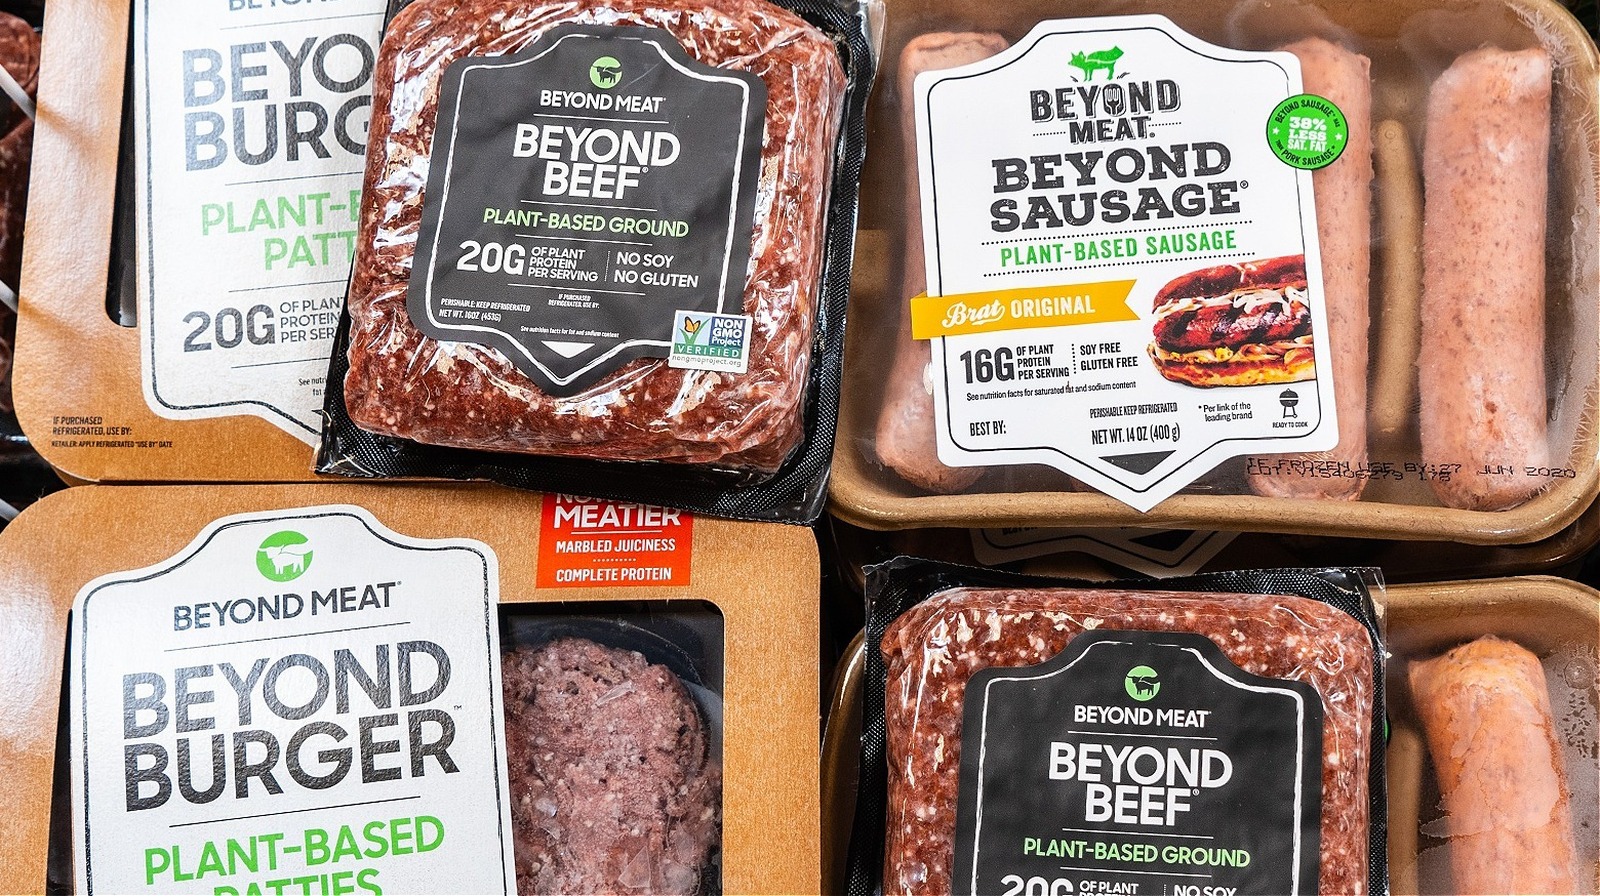 Beyond Meat Isn't Having The Best Year With Stocks Dropping 83% And ...